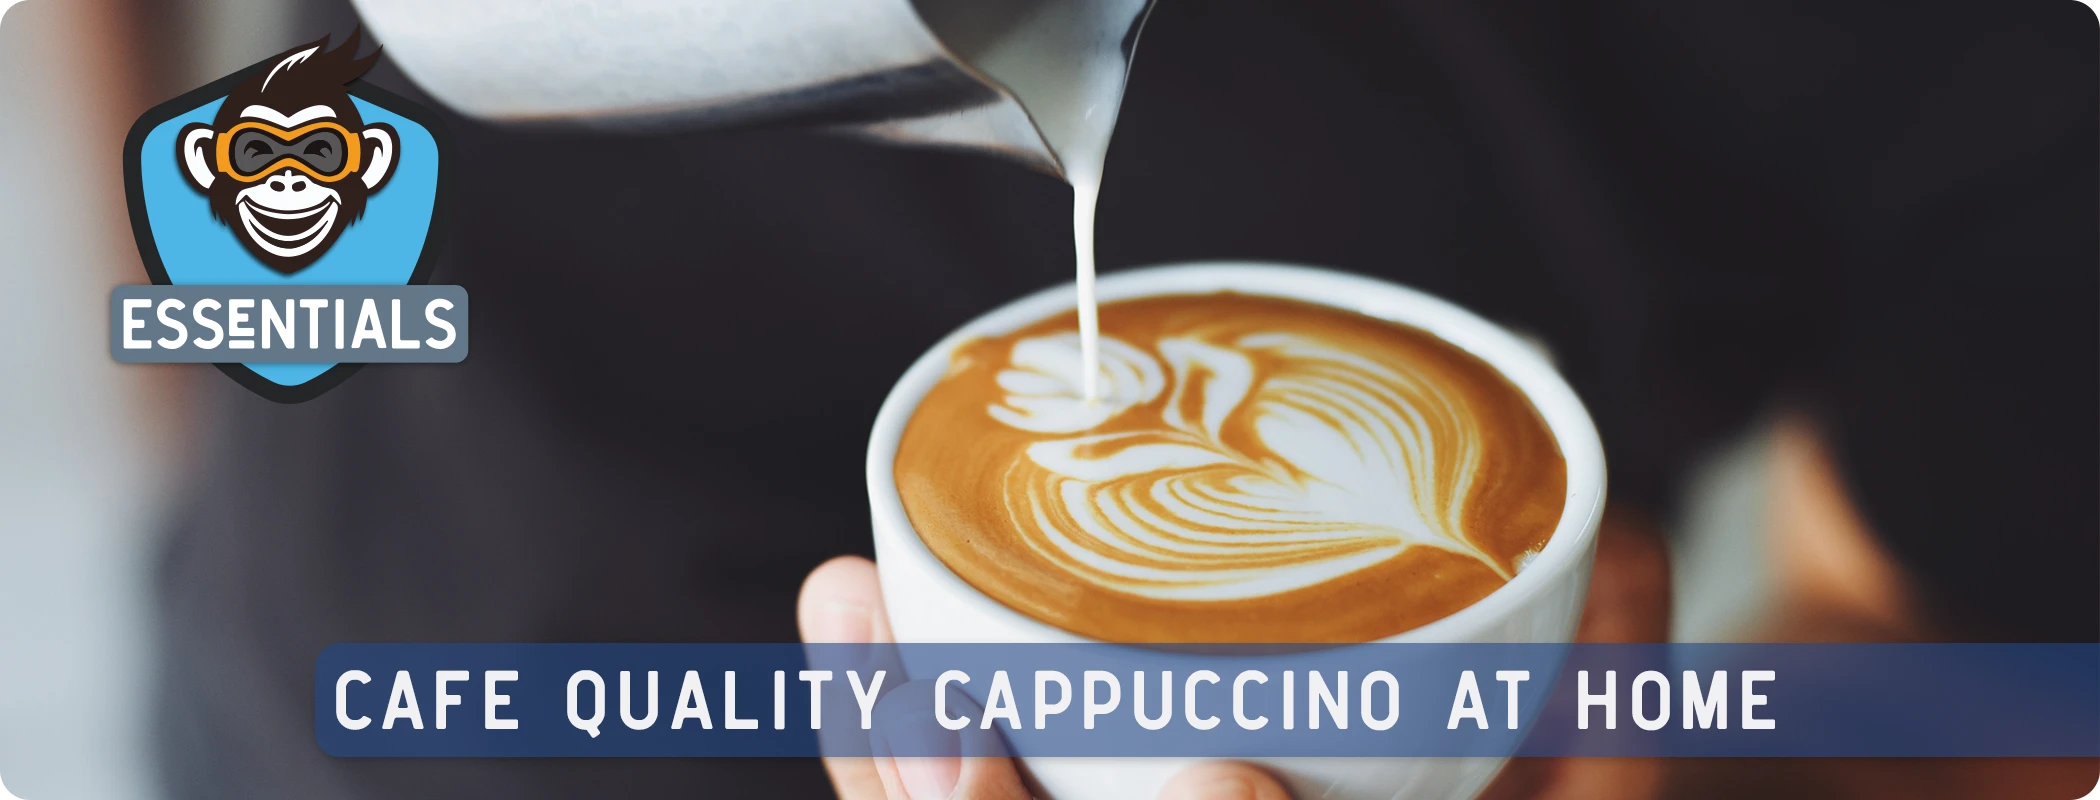 Cafe Quality Cappuccinos at Home